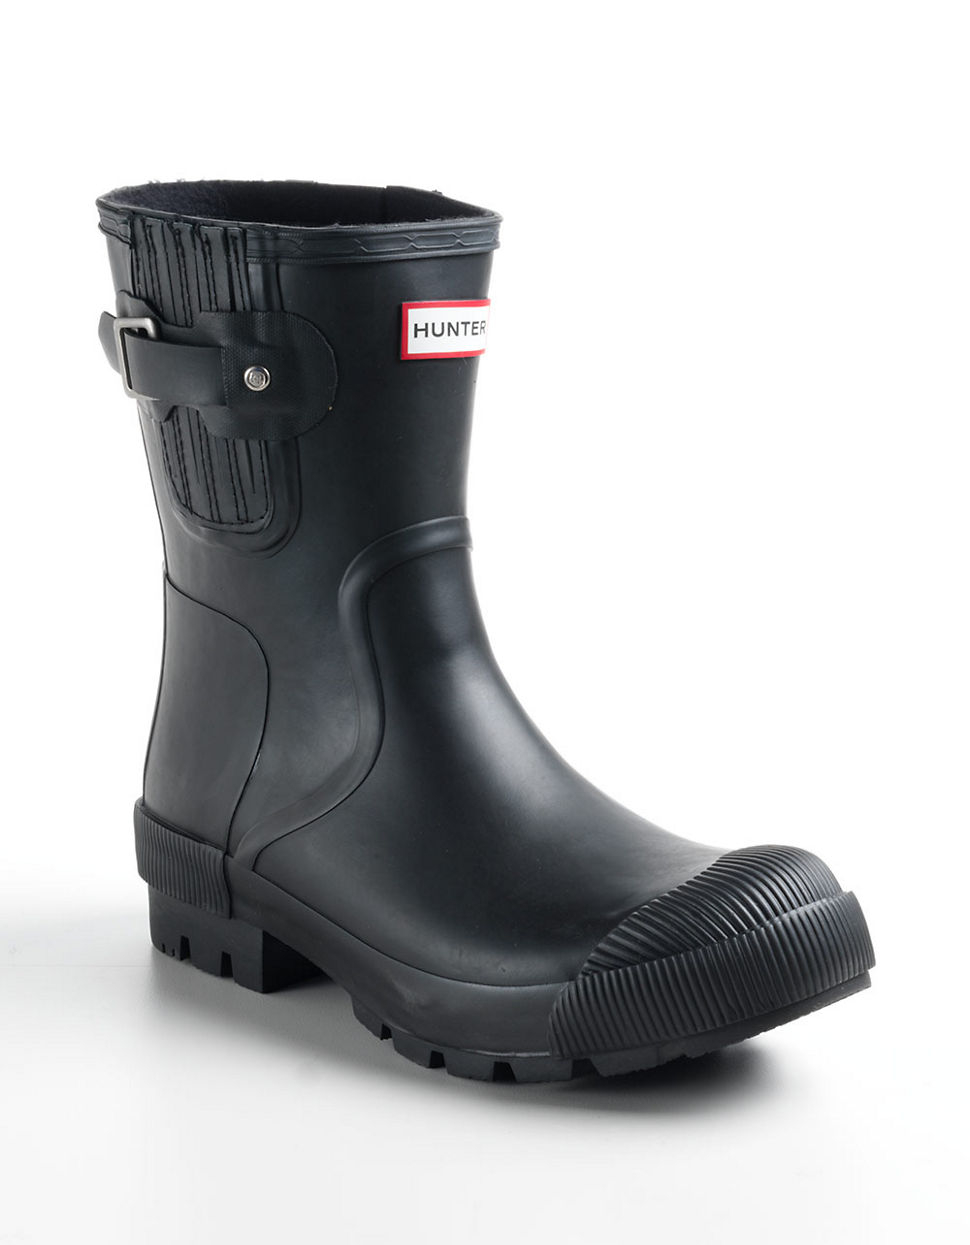 HUNTER Short Welly Boots in Black for Men - Lyst